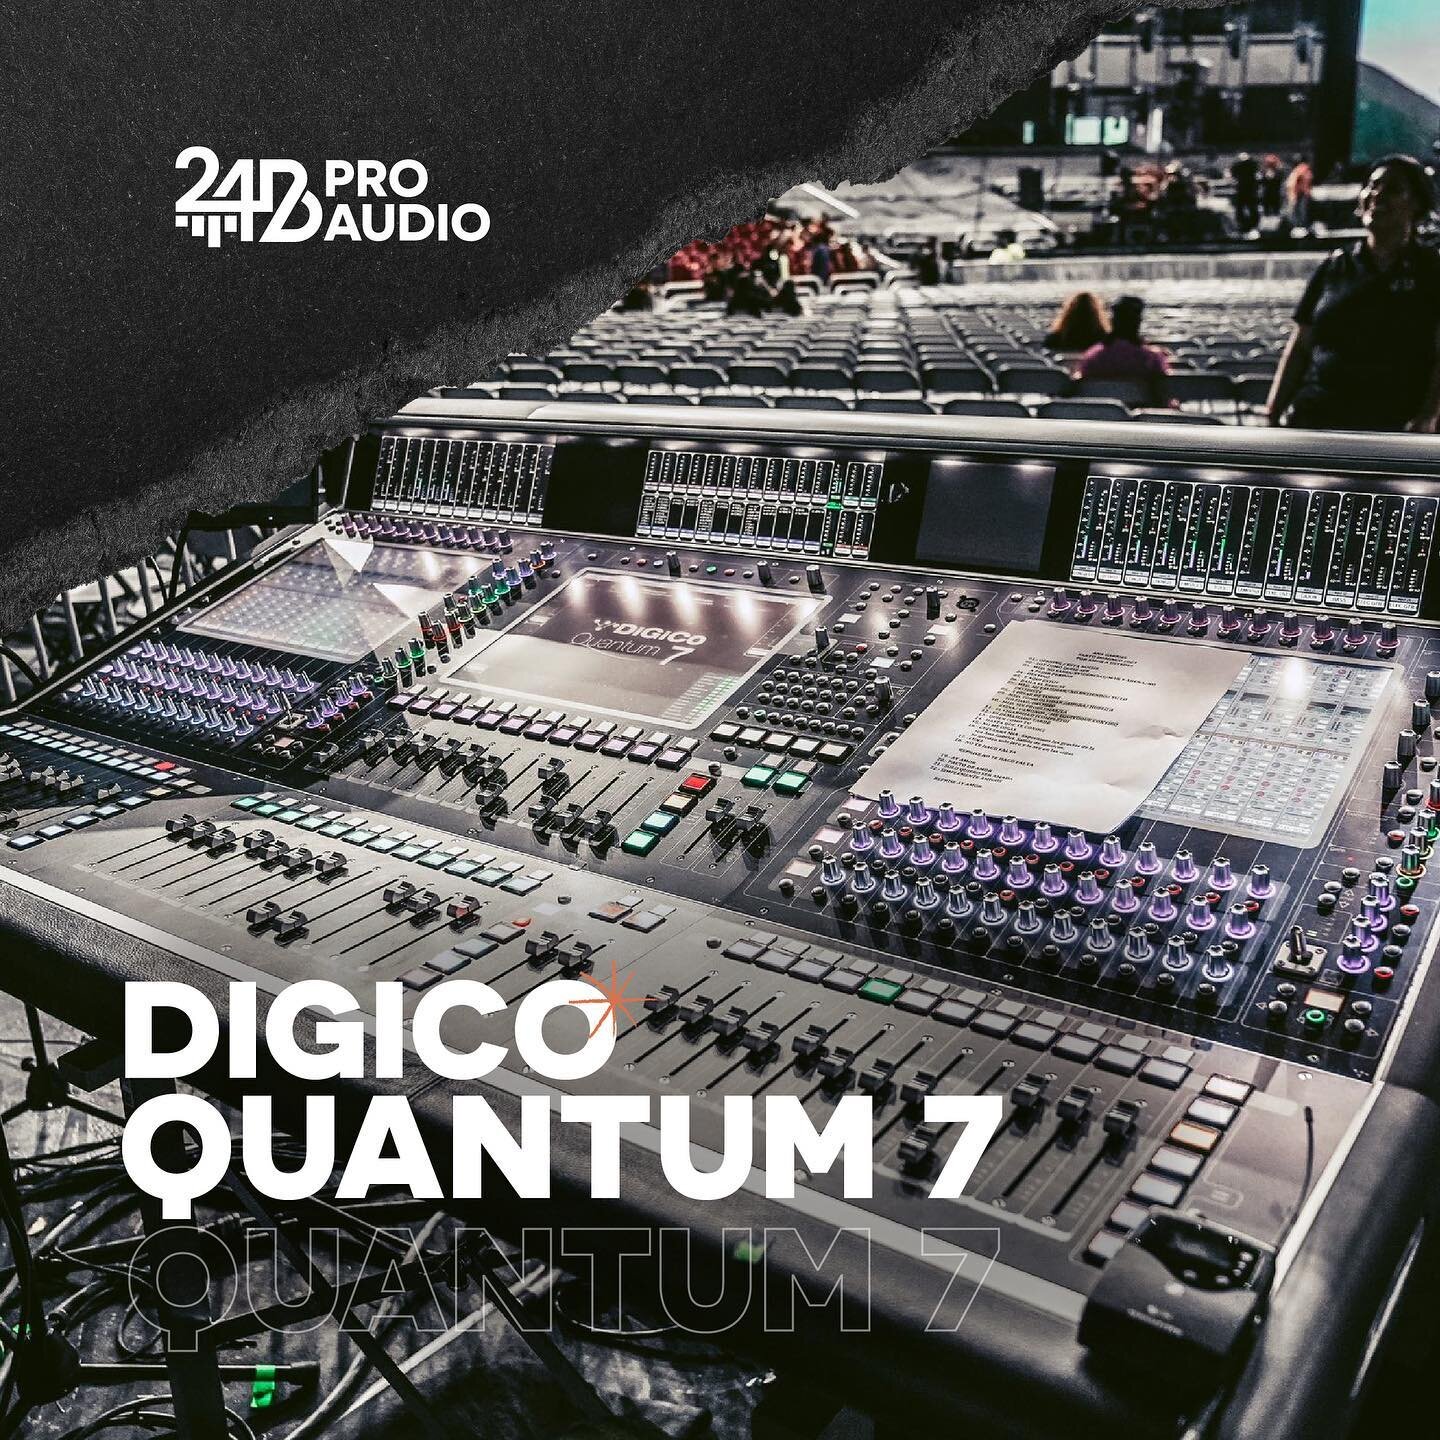 Your Show requires a Console that elevates your performance with power. 

This Digico Quantum 7 will provide you a high-quality sound that will make your show a unforgettable one 🤩

#24BProAudio #DIGICO #QUANTUM7